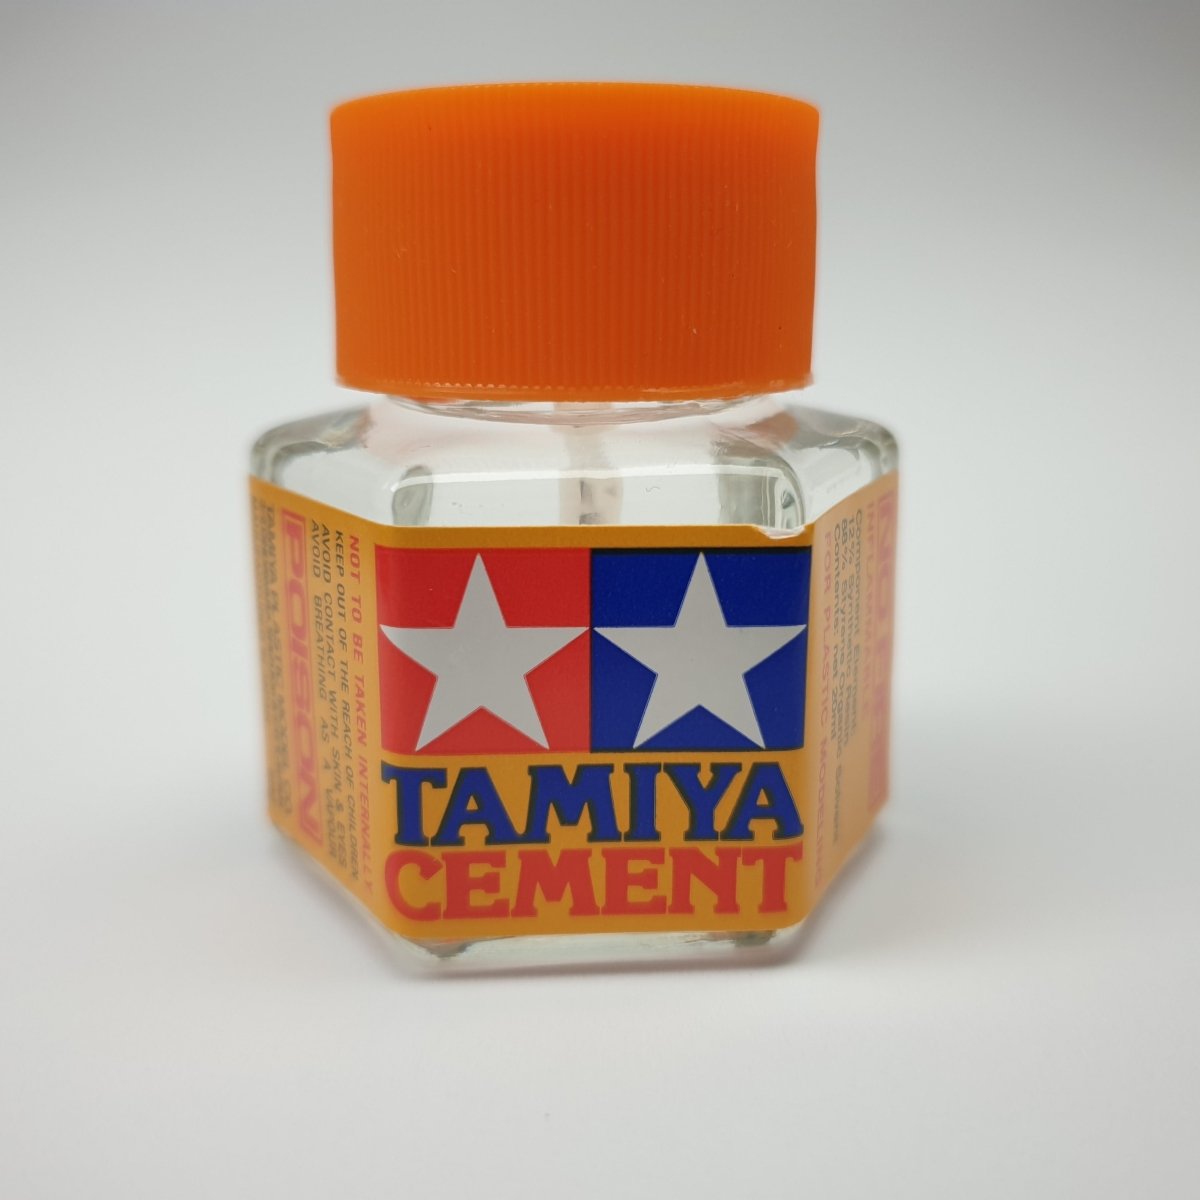 Tamiya Cement for Plastic Models (87003)